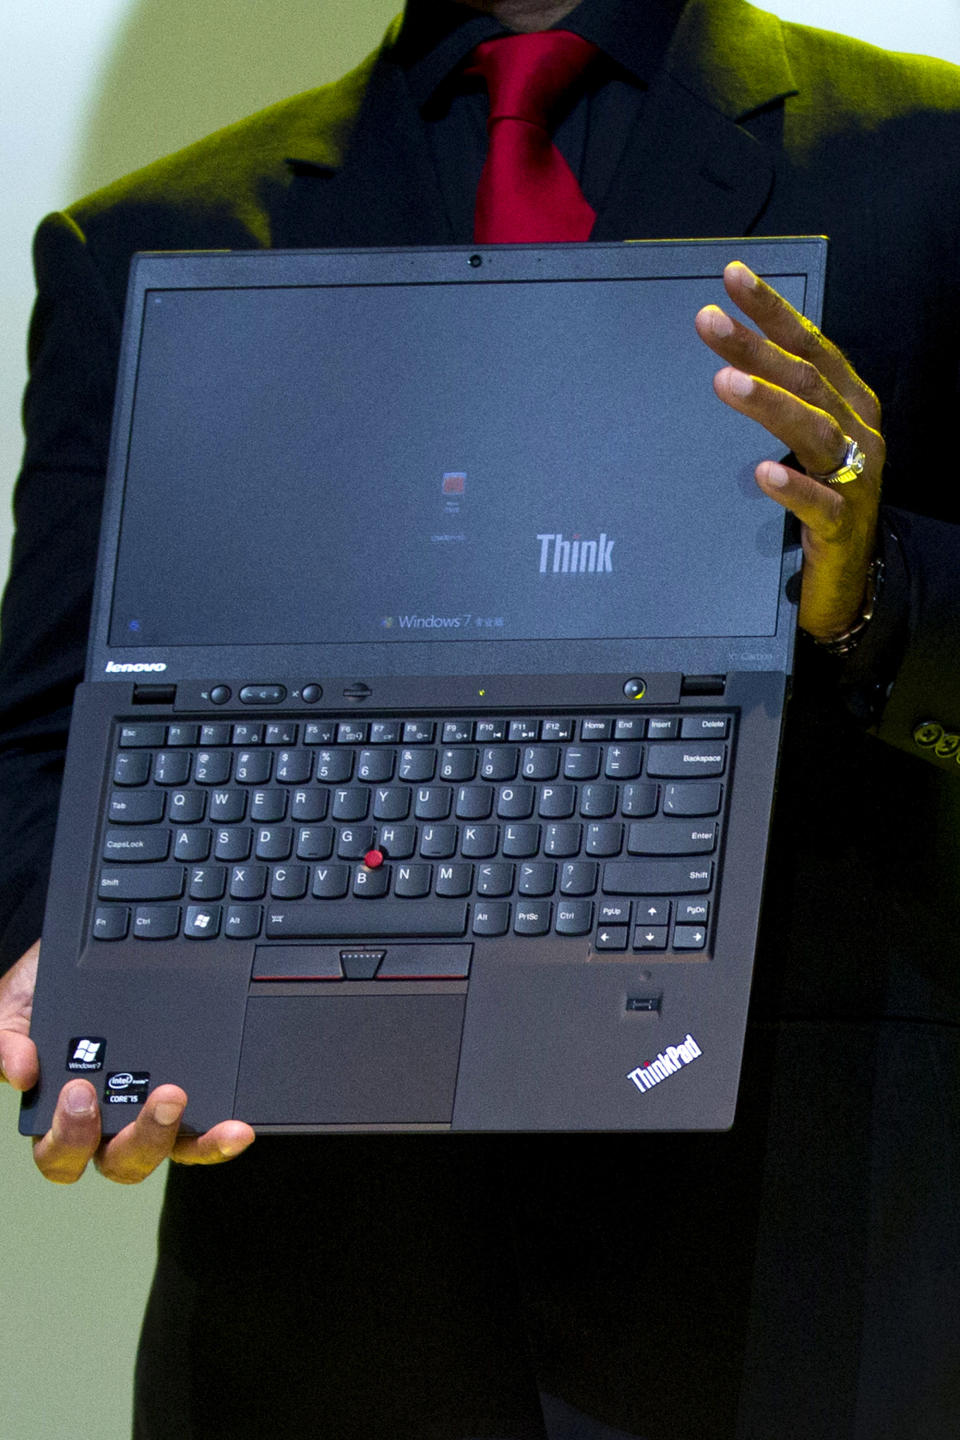 Lenovo Vice President Dilip Bhatia holds a new ThinkPad X1 Carbon laptop in Beijing Monday, Aug. 6, 2012. The Chinese computer maker unveiled the lighter, quicker ThinkPad notebook computer inspired by the convenience of tablets and smart phones. (AP Photo/Alexander F. Yuan)